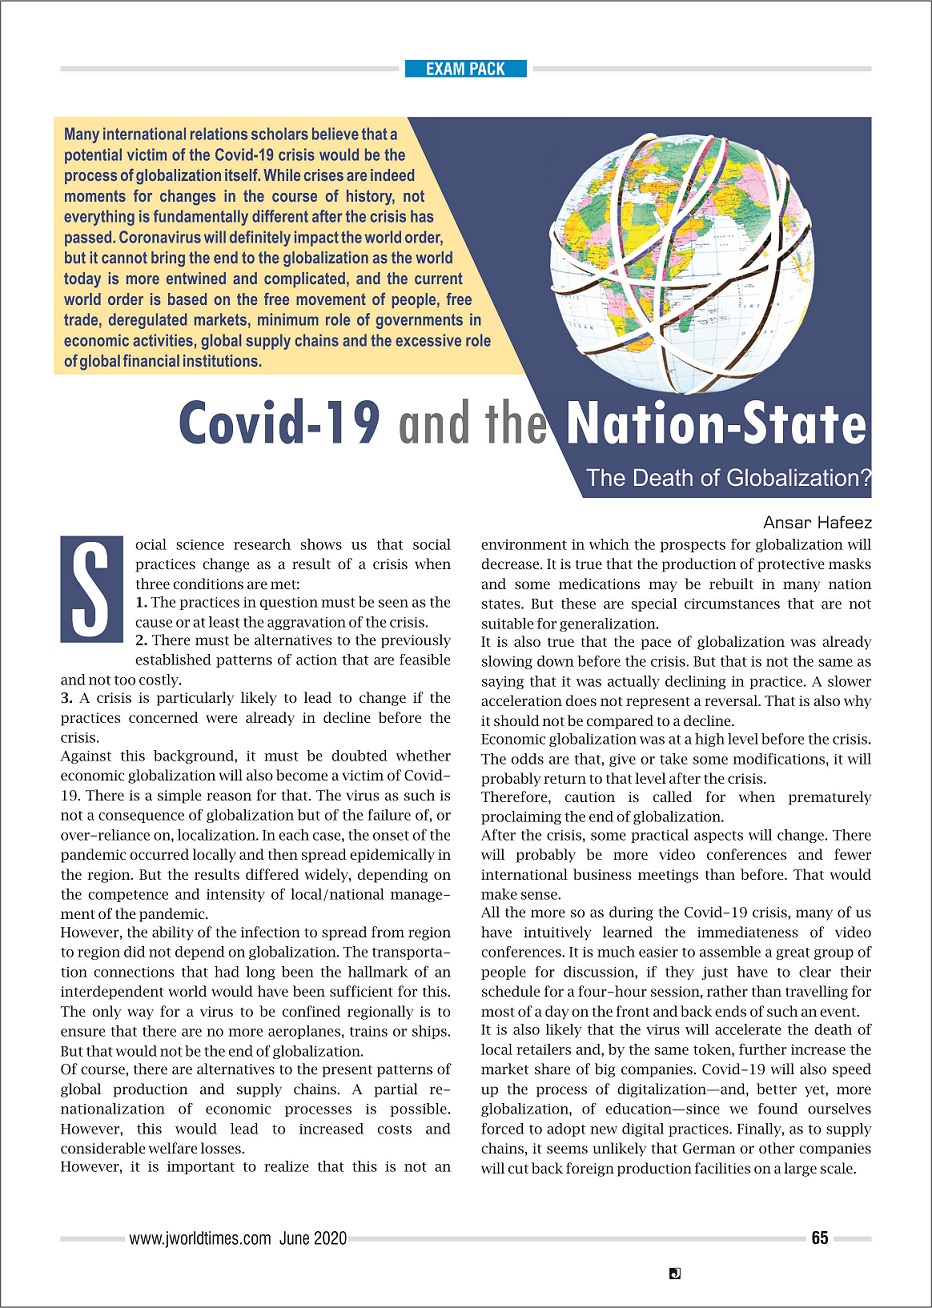 Covid-19 and the Nation-State